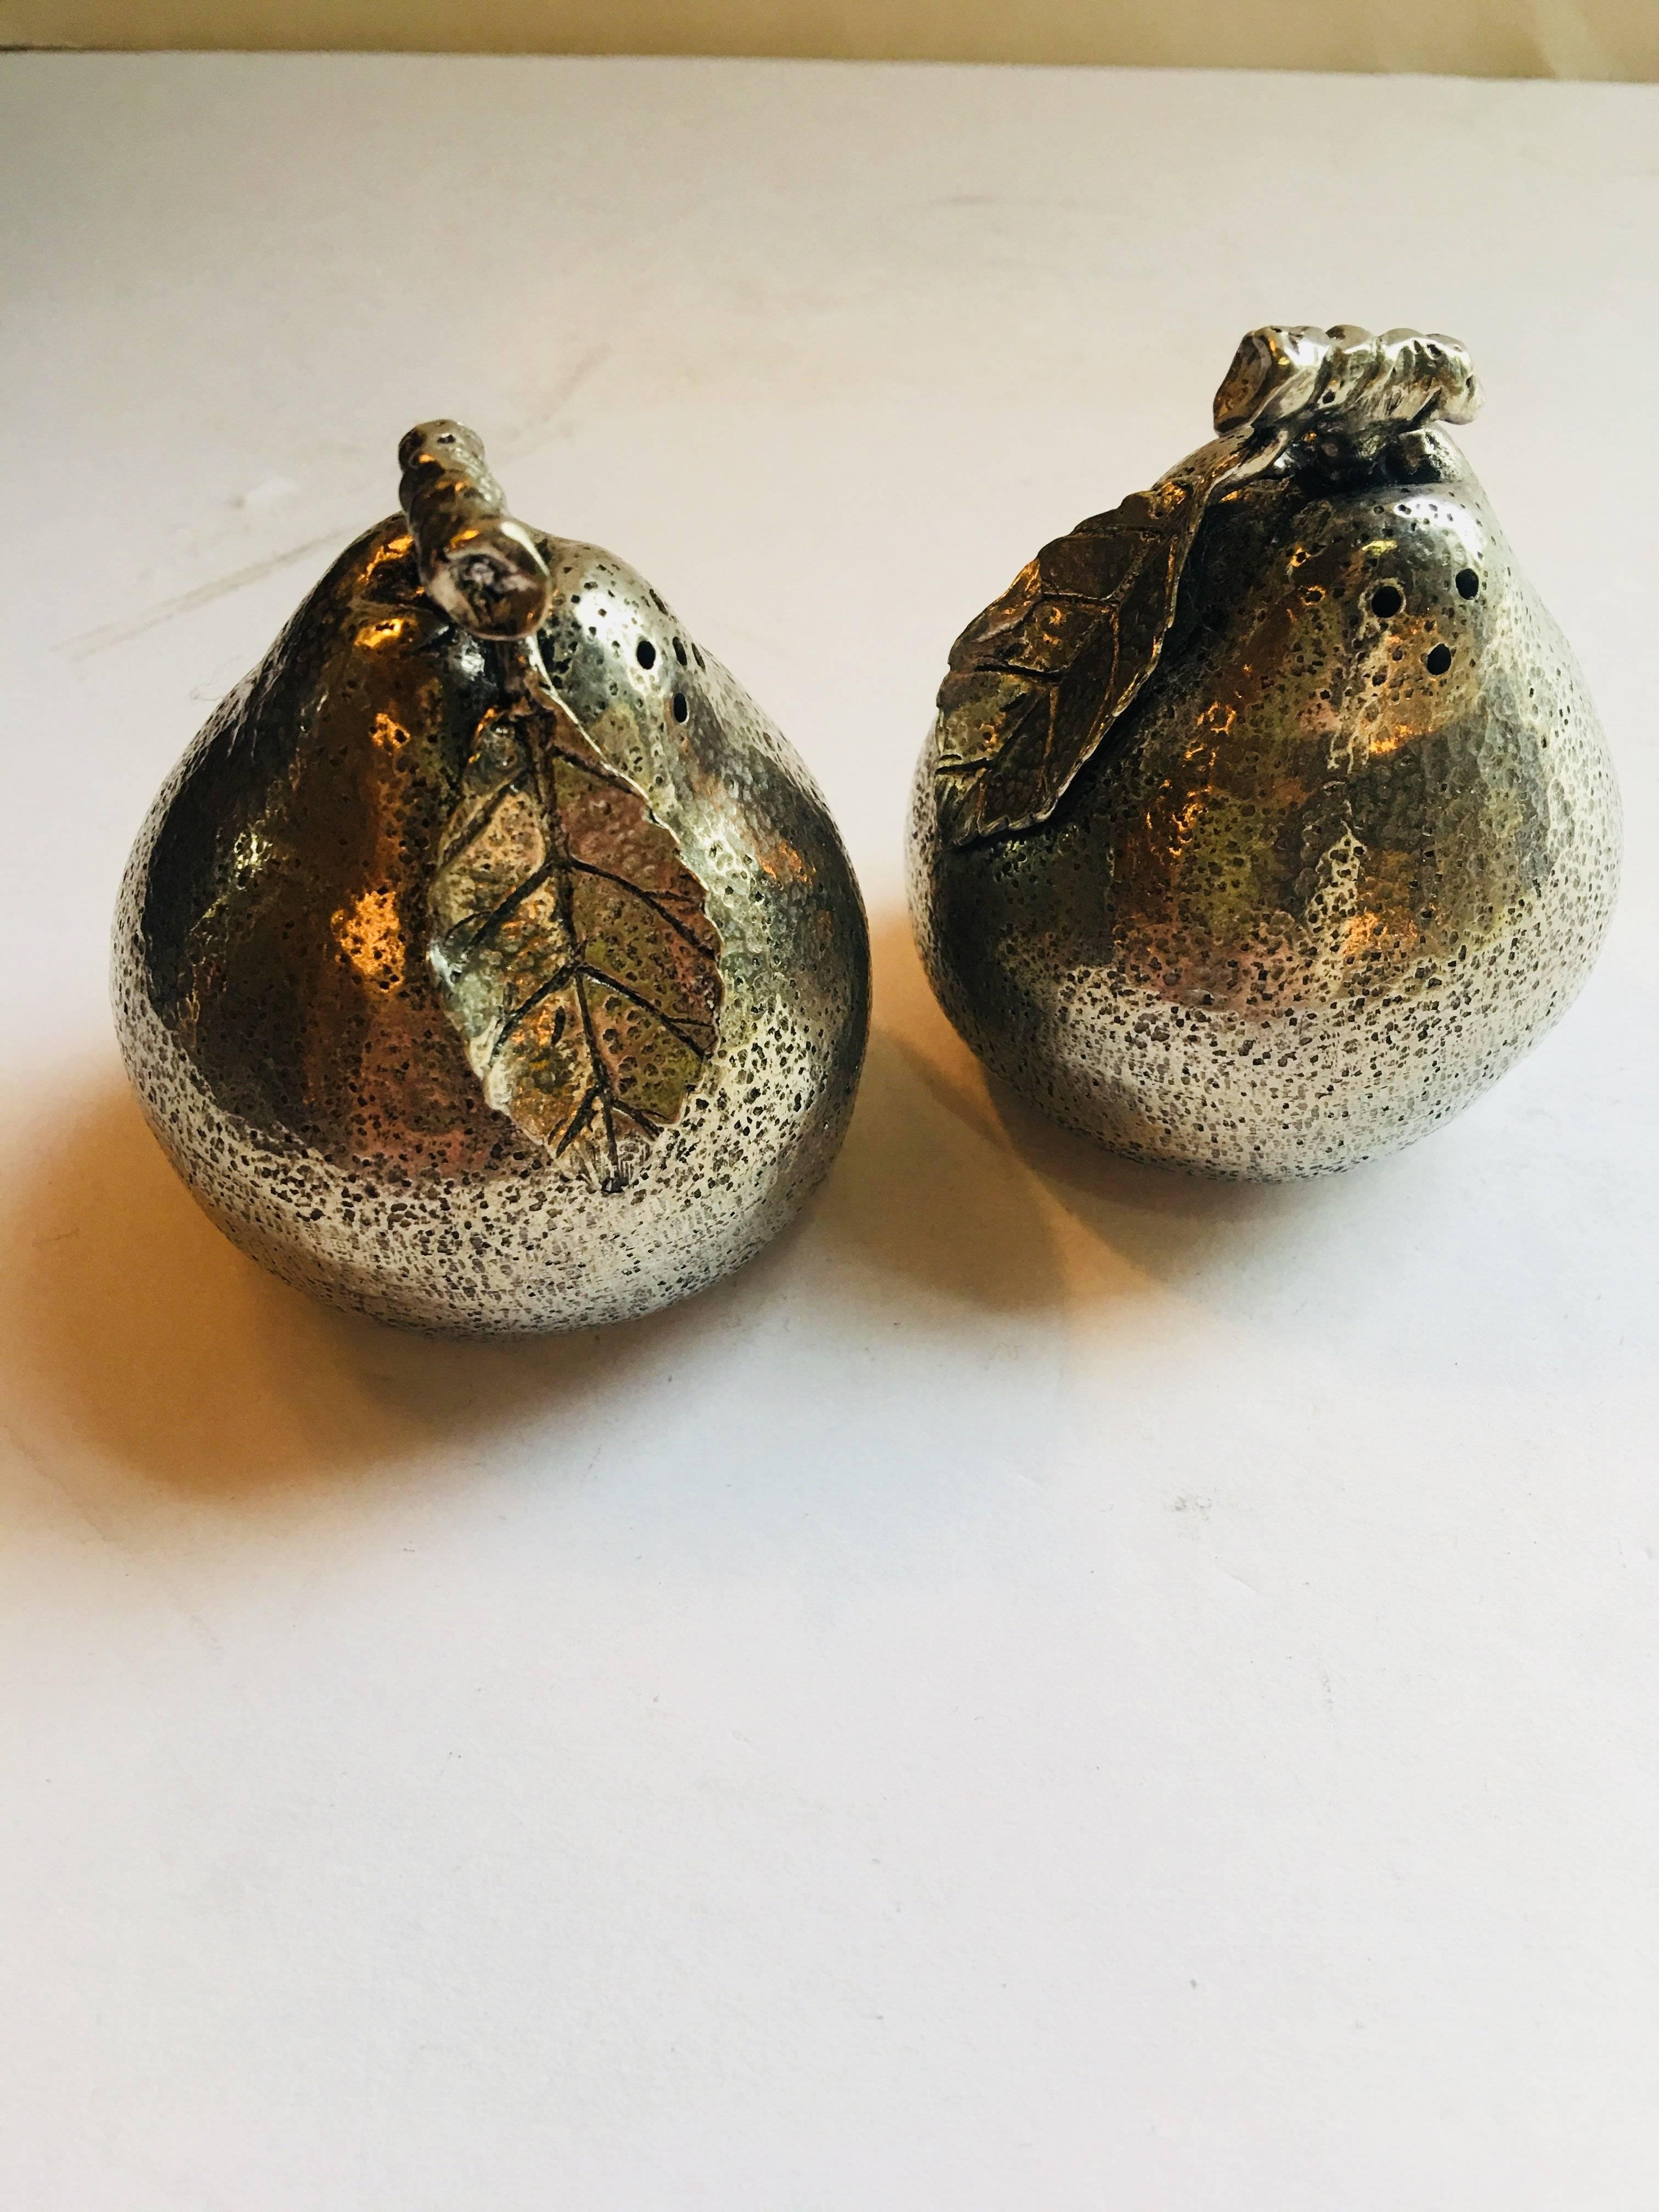 Contemporary Pear Salt and Pepper Shakers